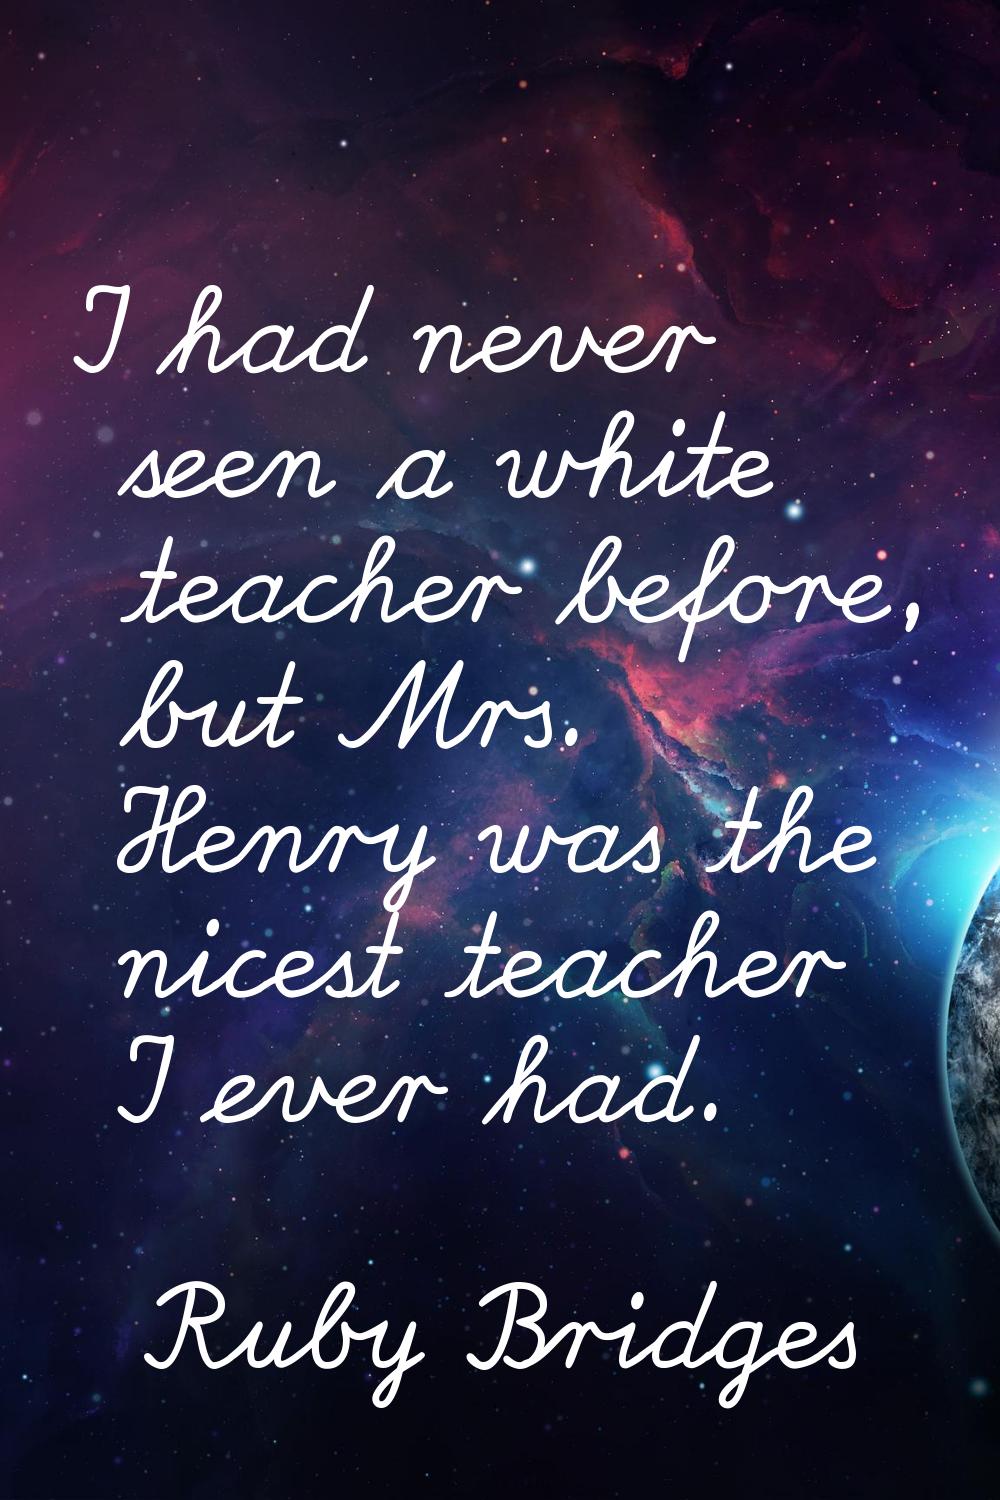 I had never seen a white teacher before, but Mrs. Henry was the nicest teacher I ever had.